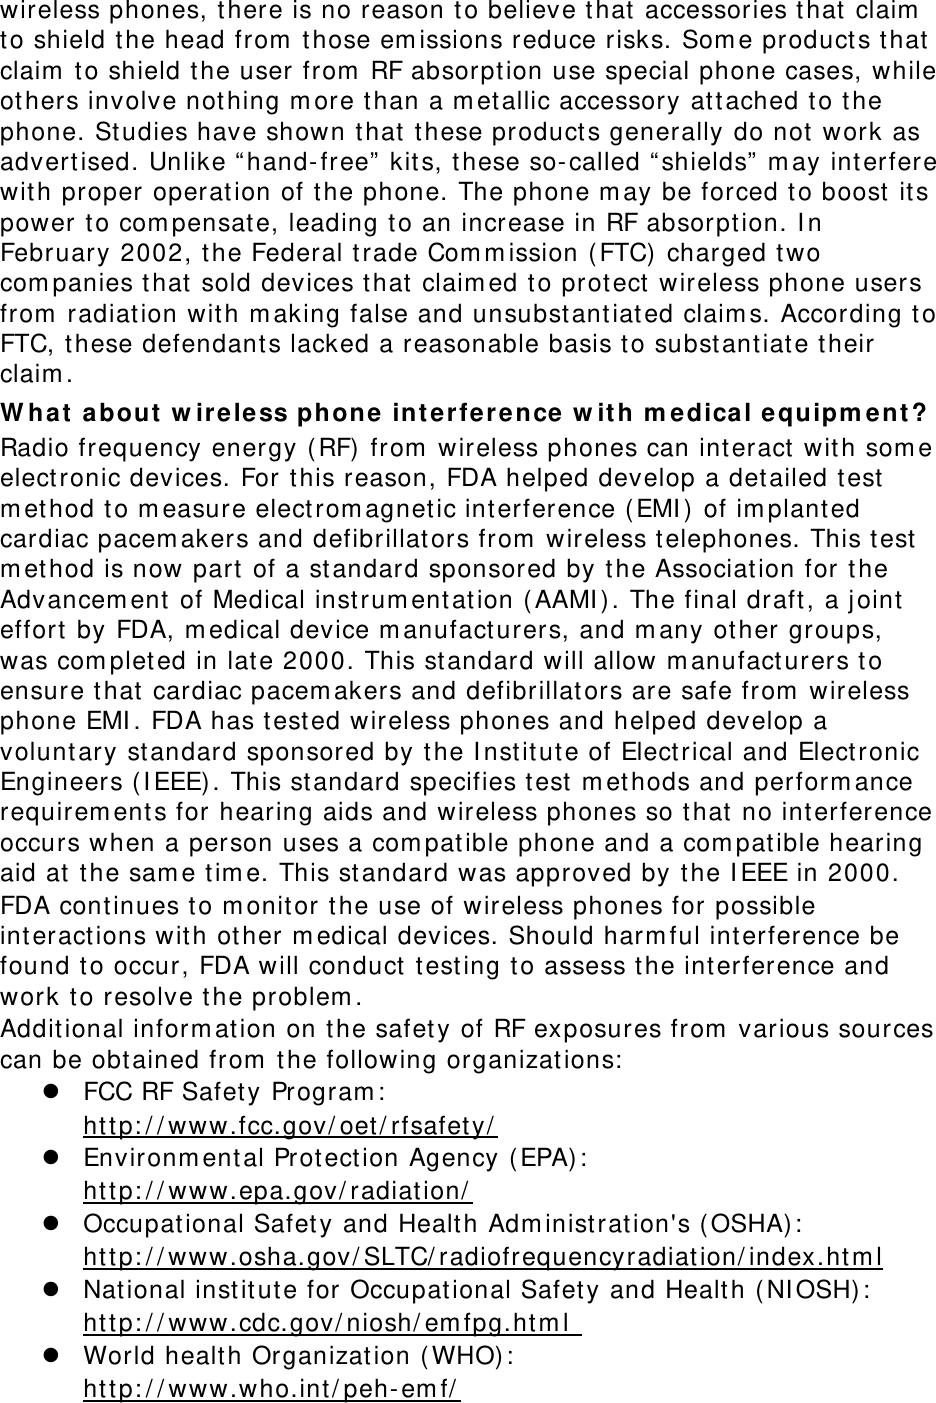 wireless phones, t here is no reason to believe t hat accessories that  claim  to shield t he head from  those em issions reduce risks. Som e product s t hat claim  t o shield t he user from  RF absorpt ion use special phone cases, while others involve nothing m ore than a m et allic accessory attached t o t he phone. Studies have shown t hat these product s generally do not work as advert ised. Unlike “ hand-free”  kits, t hese so- called “ shields”  m ay int erfere with proper operation of t he phone. The phone m ay be forced t o boost  its power t o com pensat e, leading to an increase in RF absorpt ion. I n February 2002, the Federal t rade Com m ission (FTC) charged two com panies t hat sold devices that  claim ed t o prot ect wireless phone users from  radiat ion wit h m aking false and unsubst ant iated claim s. According t o FTC, these defendants lacked a reasonable basis t o subst antiate t heir claim . W ha t about  w ir ele ss phone  int erfer ence w ith m e dical e qu ipm ent ? Radio frequency energy (RF)  from  wireless phones can int eract  wit h som e elect ronic devices. For t his reason, FDA helped develop a det ailed test m ethod t o m easure elect rom agnet ic int erference ( EMI )  of im plant ed cardiac pacem akers and defibrillators from  wireless t elephones. This t est m ethod is now part  of a standard sponsored by t he Association for t he Advancem ent of Medical inst rum ent at ion ( AAMI ) . The final draft , a j oint effort  by FDA, m edical device m anufact urers, and m any other groups, was com pleted in lat e 2000. This standard will allow m anufact urers to ensure that cardiac pacem akers and defibrillators are safe from  wireless phone EMI . FDA has t est ed wireless phones and helped develop a volunt ary standard sponsored by the I nst itute of Electrical and Elect ronic Engineers ( I EEE) . This st andard specifies t est  m ethods and perform ance requirem ent s for hearing aids and wireless phones so t hat no interference occurs when a person uses a com patible phone and a com patible hearing aid at  t he sam e tim e. This st andard was approved by the I EEE in 2000. FDA cont inues to m onitor t he use of wireless phones for possible int eract ions with ot her m edical devices. Should harm ful interference be found t o occur, FDA will conduct  t esting t o assess t he int erference and work t o resolve t he problem . Additional inform at ion on t he safet y of RF exposures from  various sources can be obtained from  the following organizations:  z FCC RF Safet y Program :   Uht tp: / / www.fcc.gov/ oet / rfsafet y/ U z Environm ent al Prot ection Agency ( EPA) :   Uht tp: / / www.epa.gov/ radiation/ U z Occupational Safety and Health Adm inist rat ion&apos;s ( OSHA) :          Uht tp: / / www.osha.gov/ SLTC/ radiofrequencyradiation/ index.htm lU z Nat ional inst itute for Occupat ional Safety and Health ( NI OSH) :   Uht tp: / / www.cdc.gov/ niosh/ em fpg.ht m l   z World health Organization (WHO) :   Uht tp: / / www.who.int / peh- em f/  